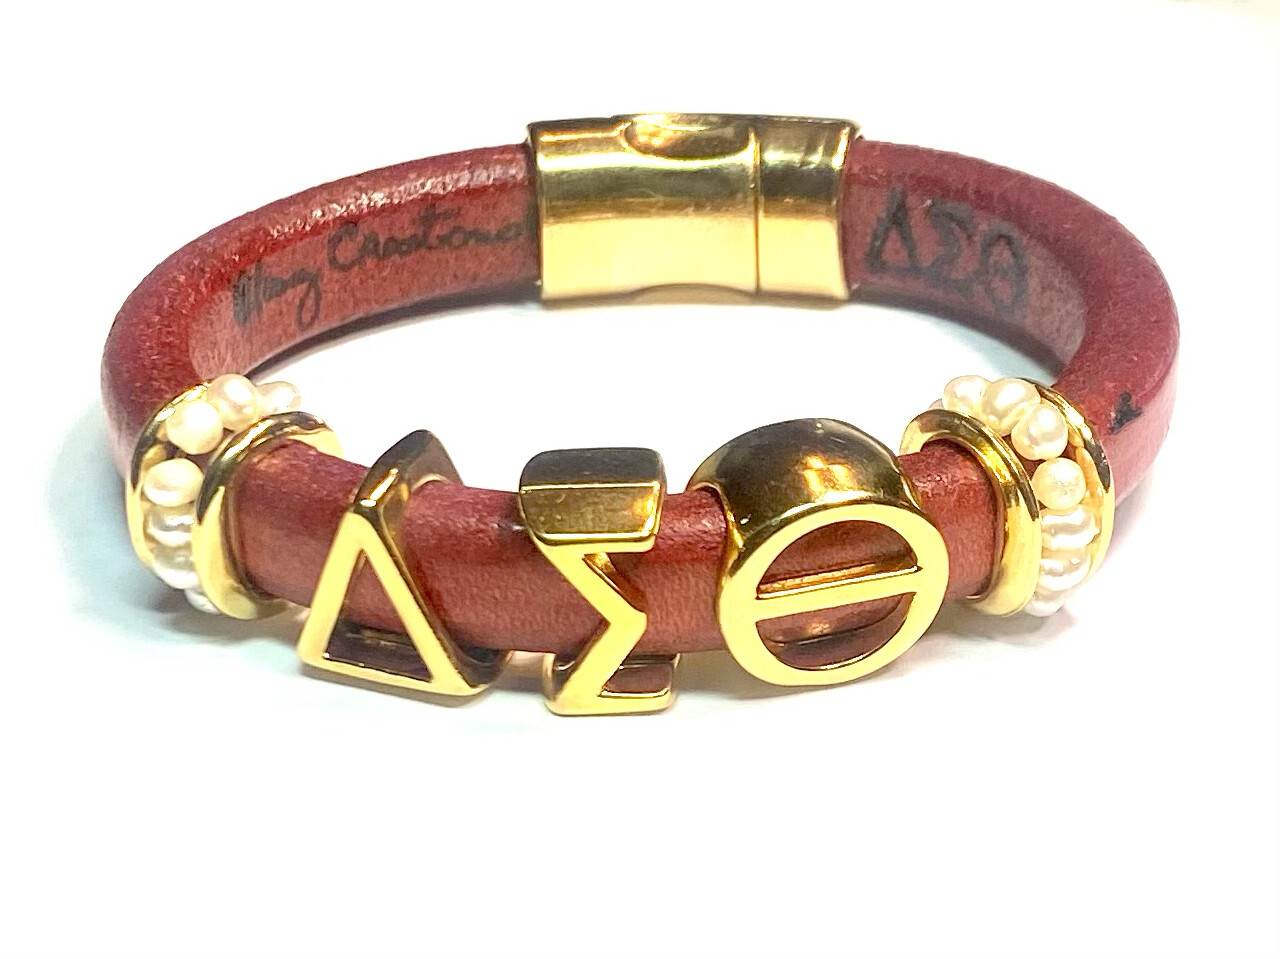 Bracelet | Red Leather With Pearls And Gold Bands Classy Creations Originals